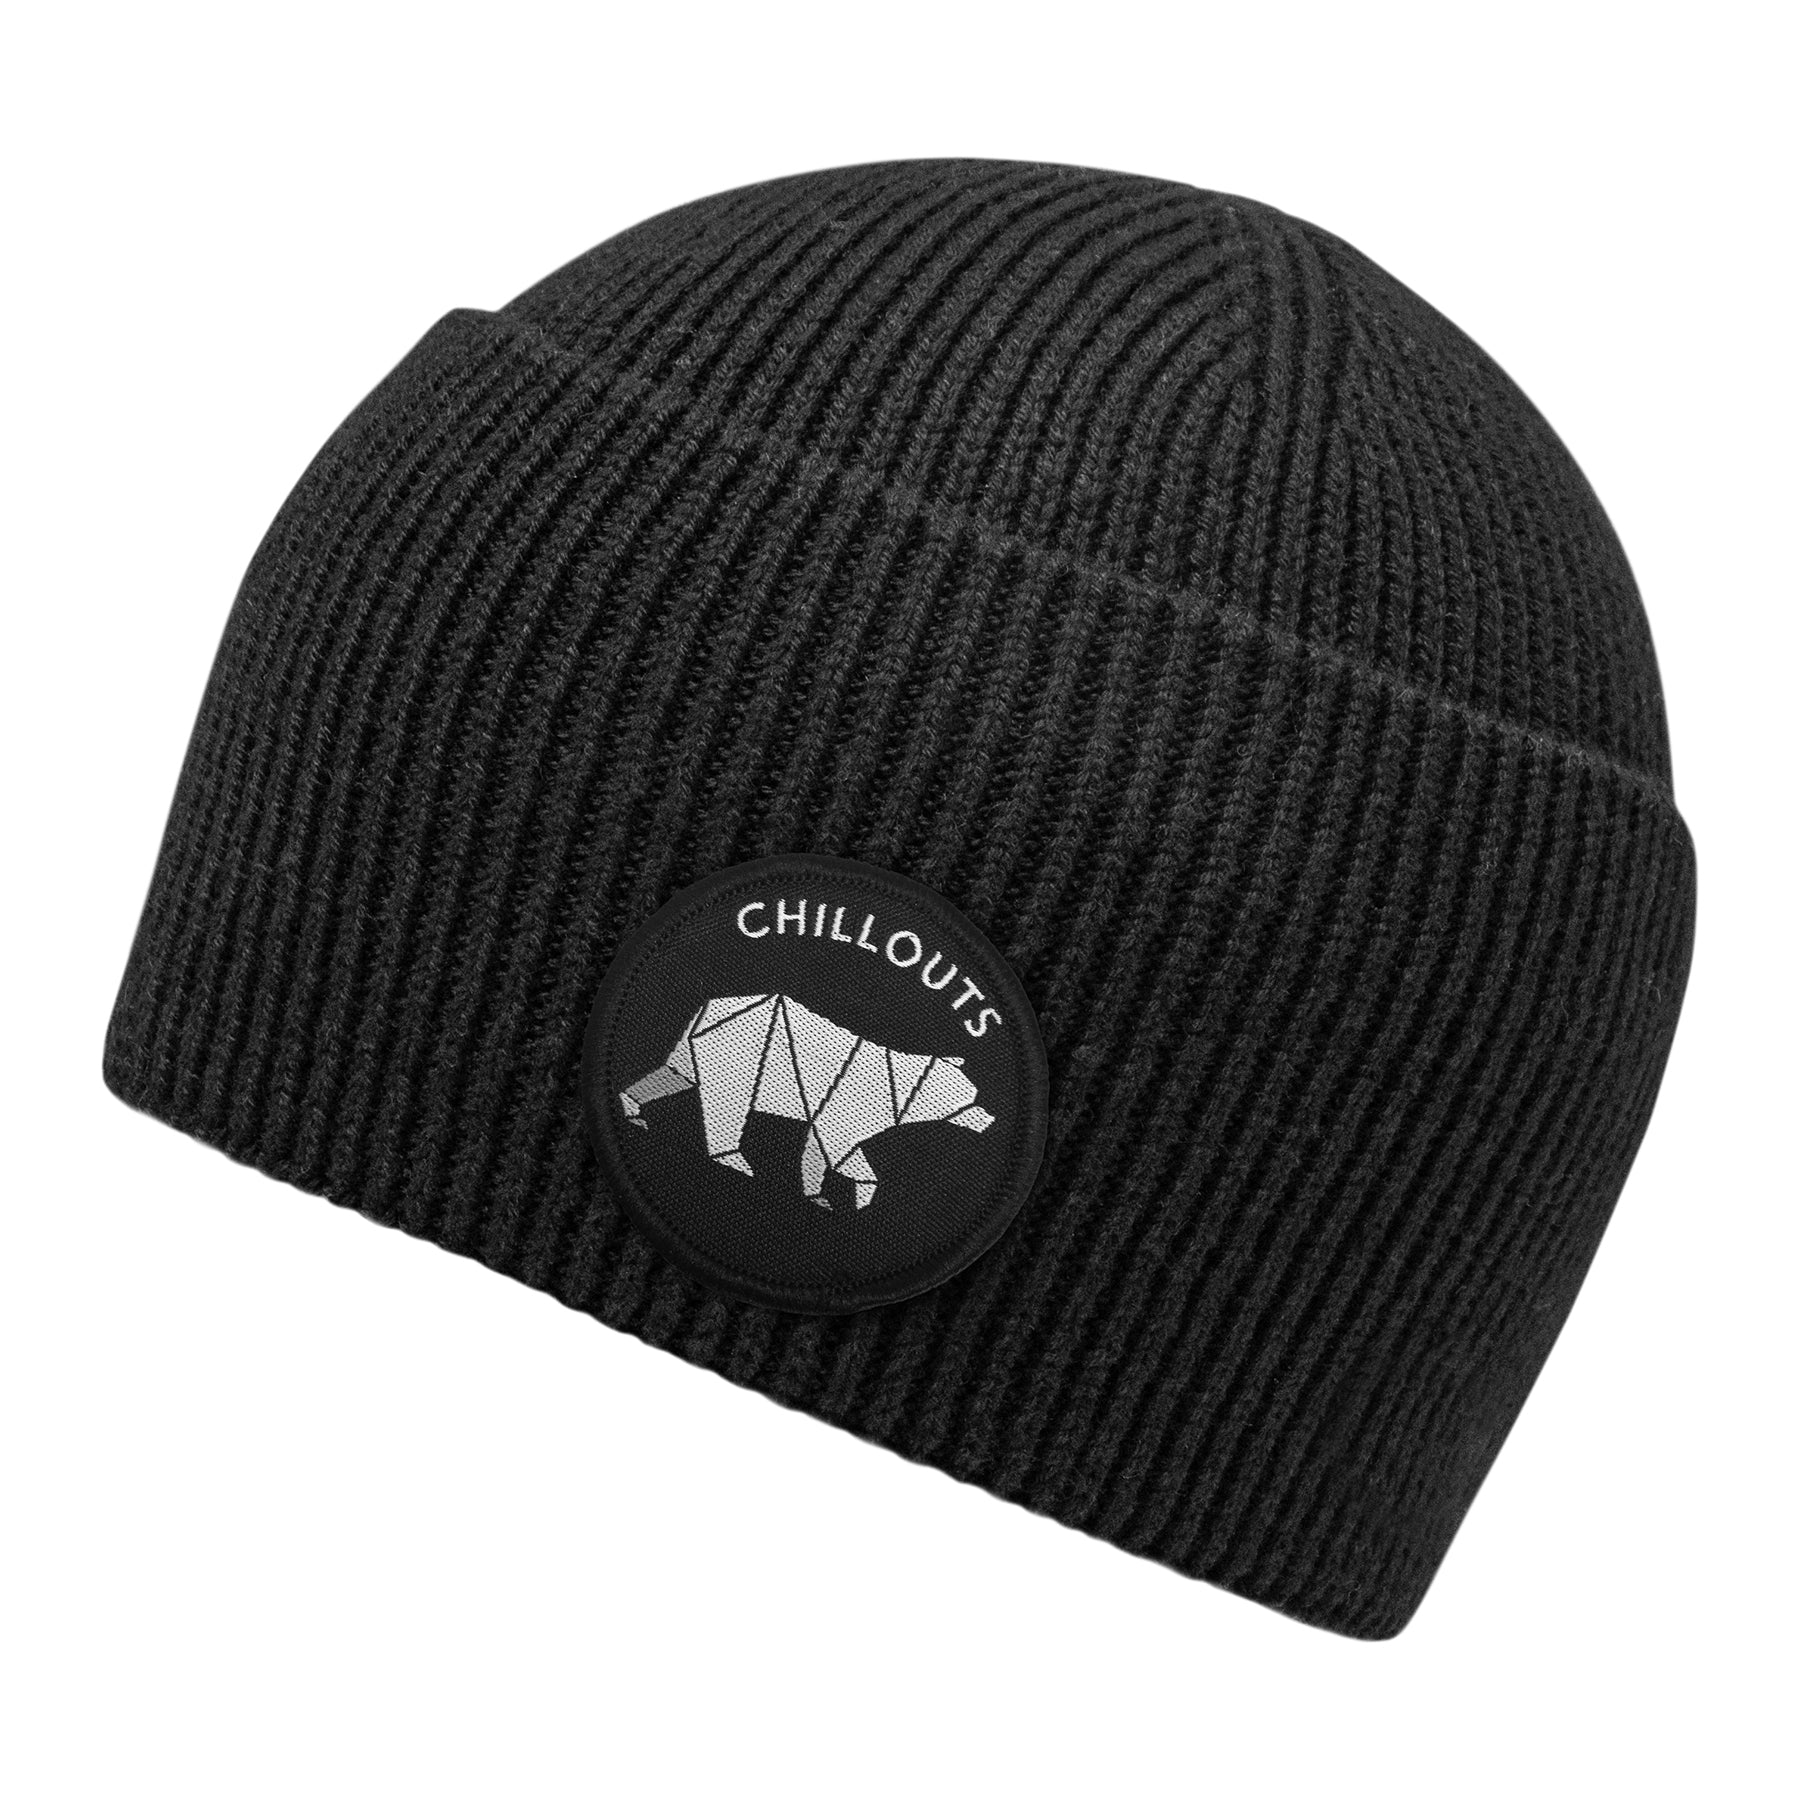 Chillouts Headwear good with & - Beanie hat cause cool – a for embroidery cuff